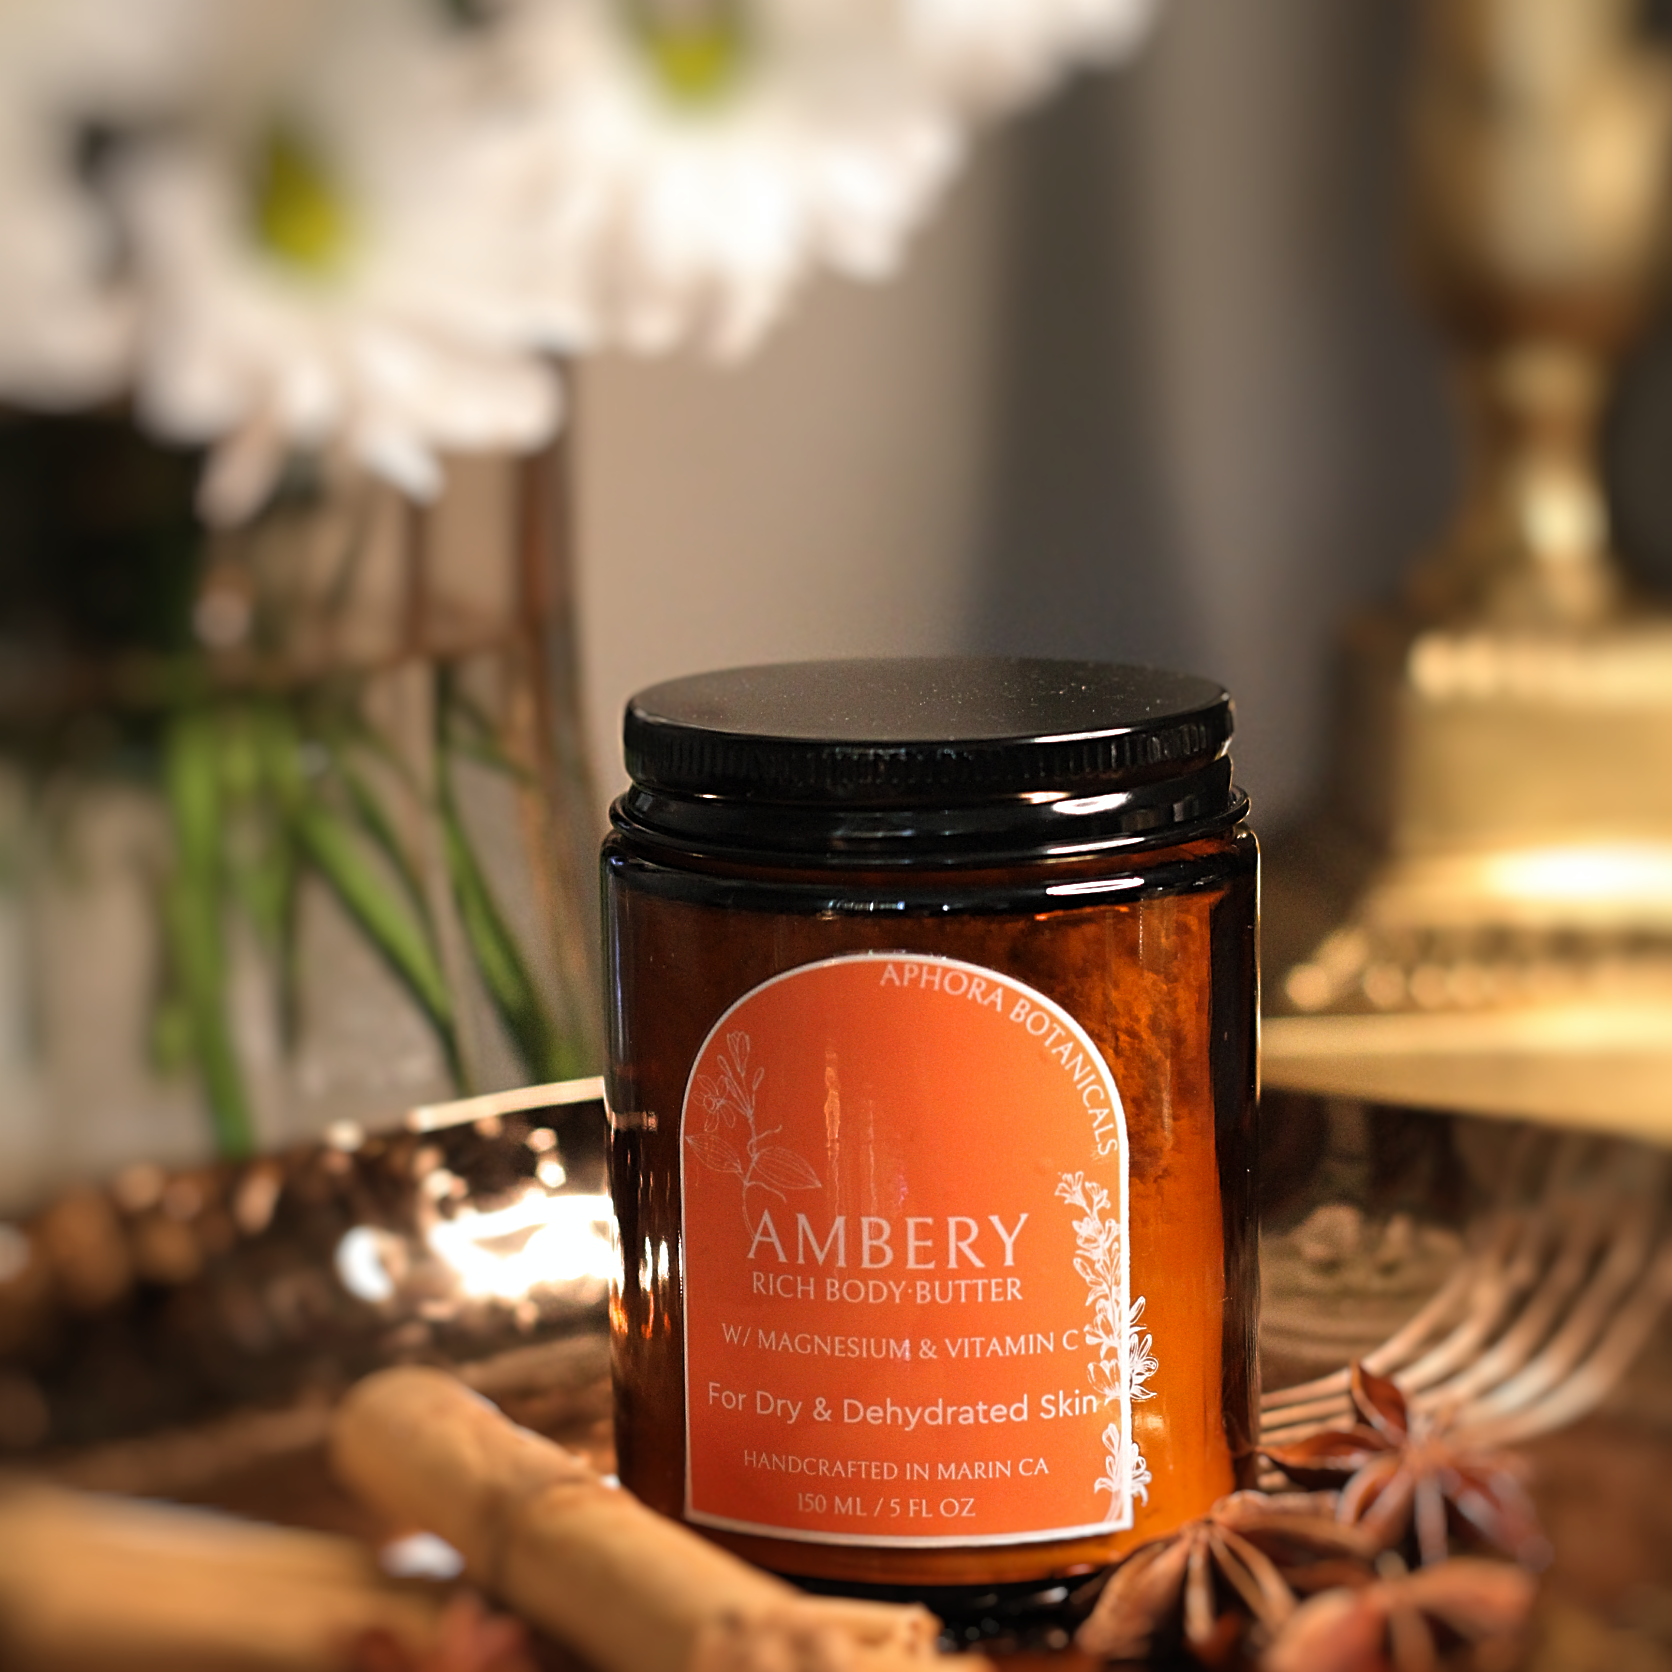 Ambery Rich Body Butter with Magnesium & Vitamin C - Aphora Botanicals